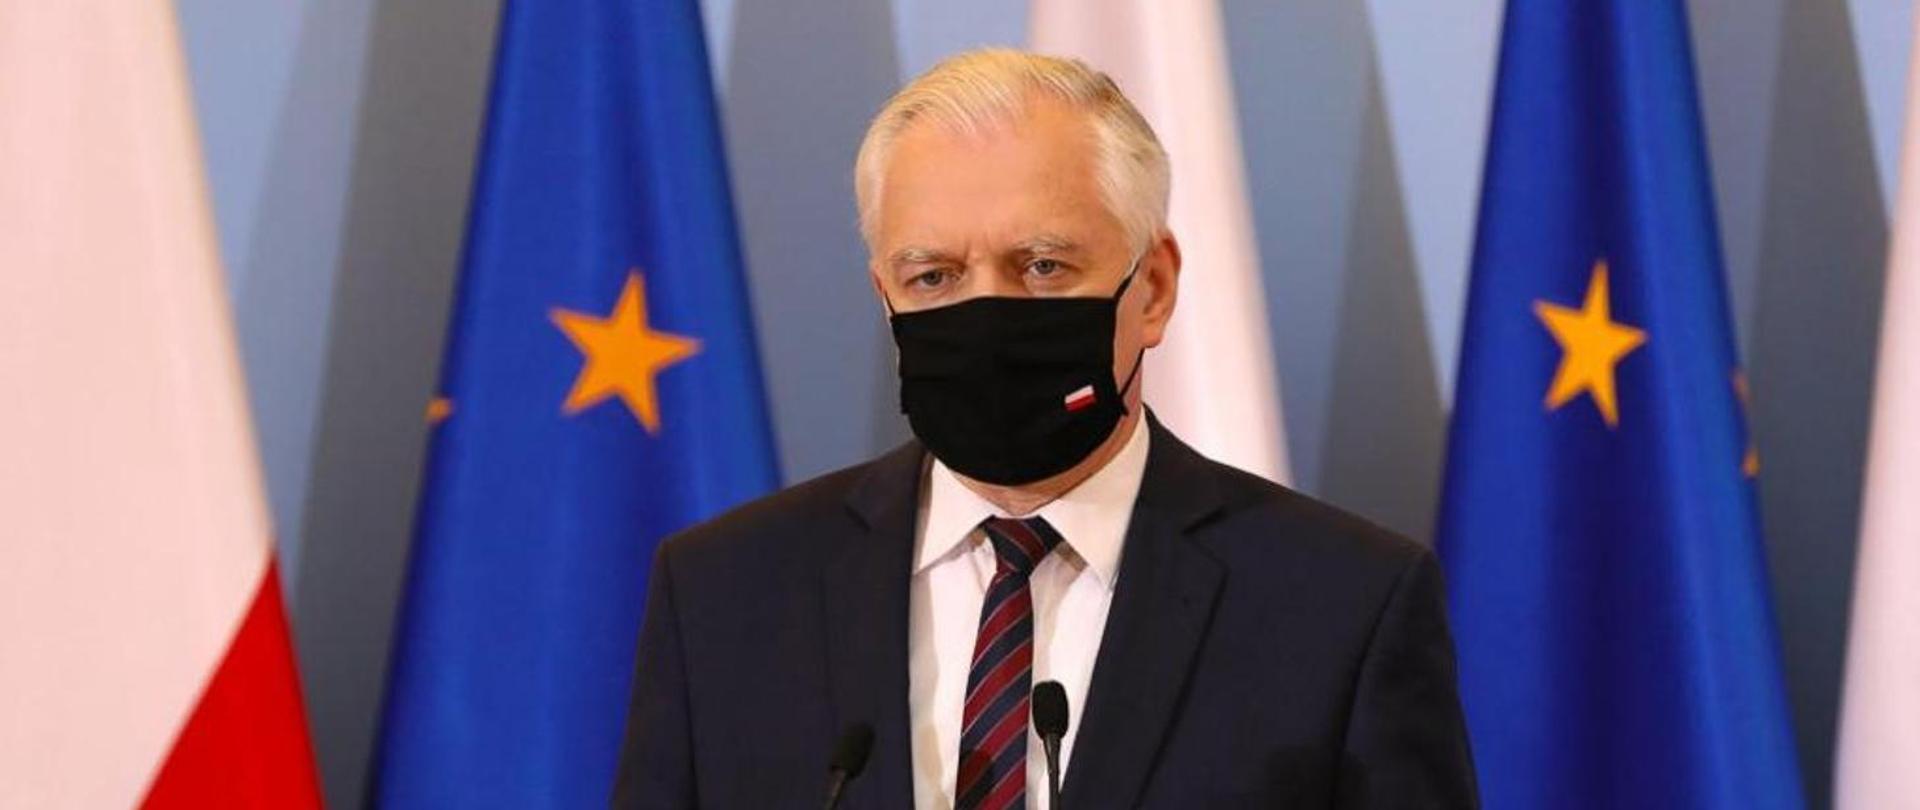 Prime Minister Jarosław Gowin wearing a cloth face mask